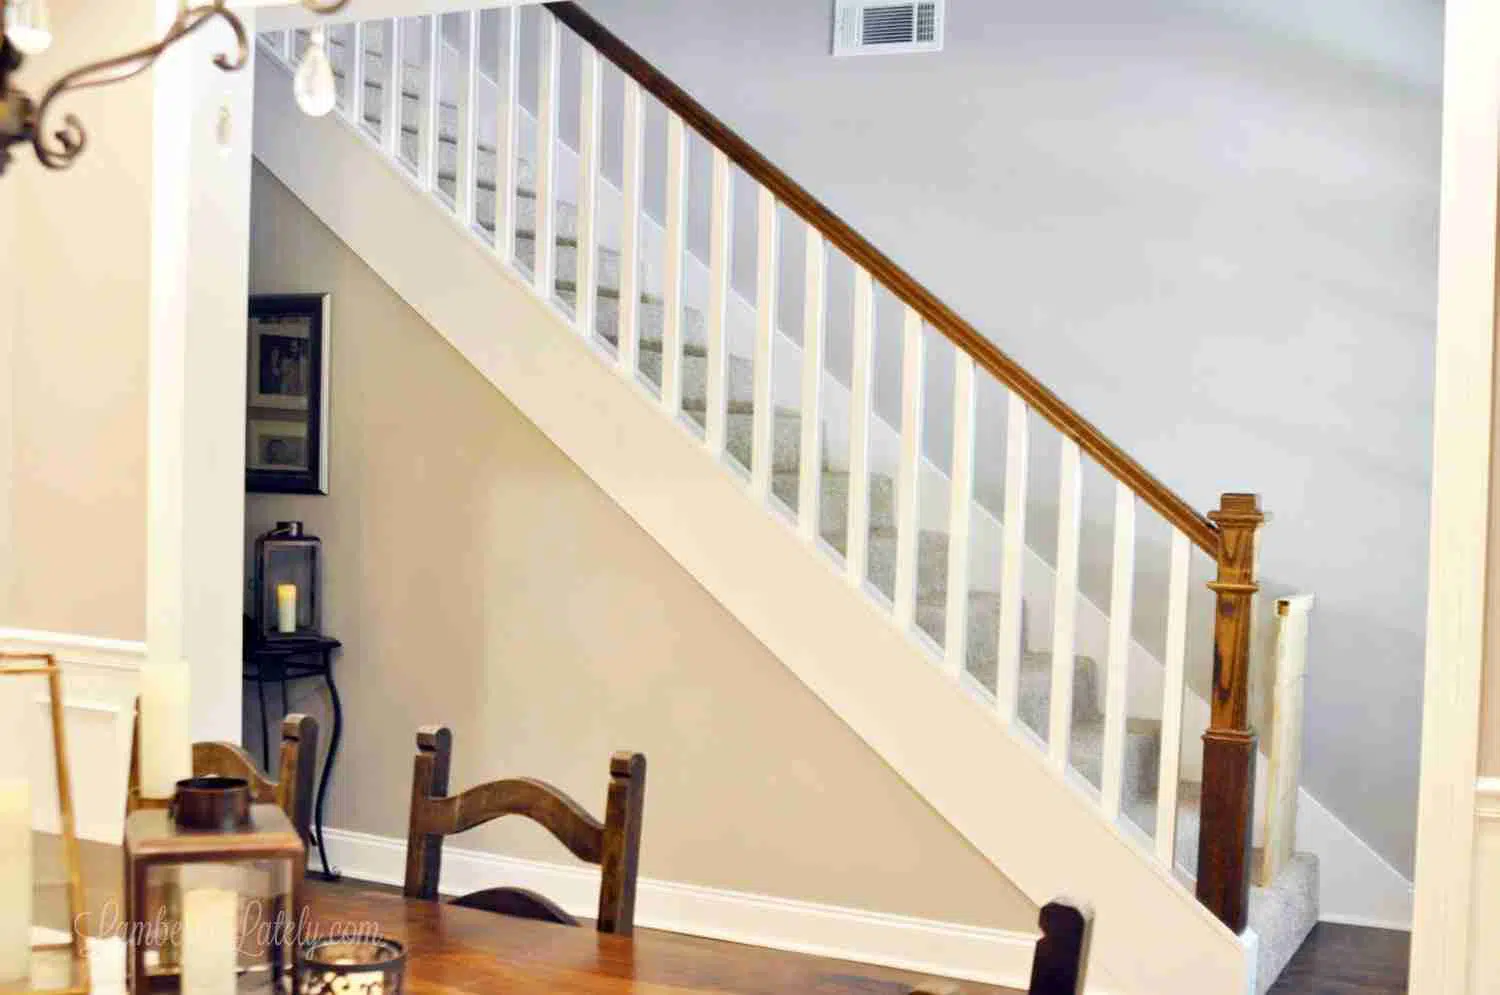 view of stairs from dining room.